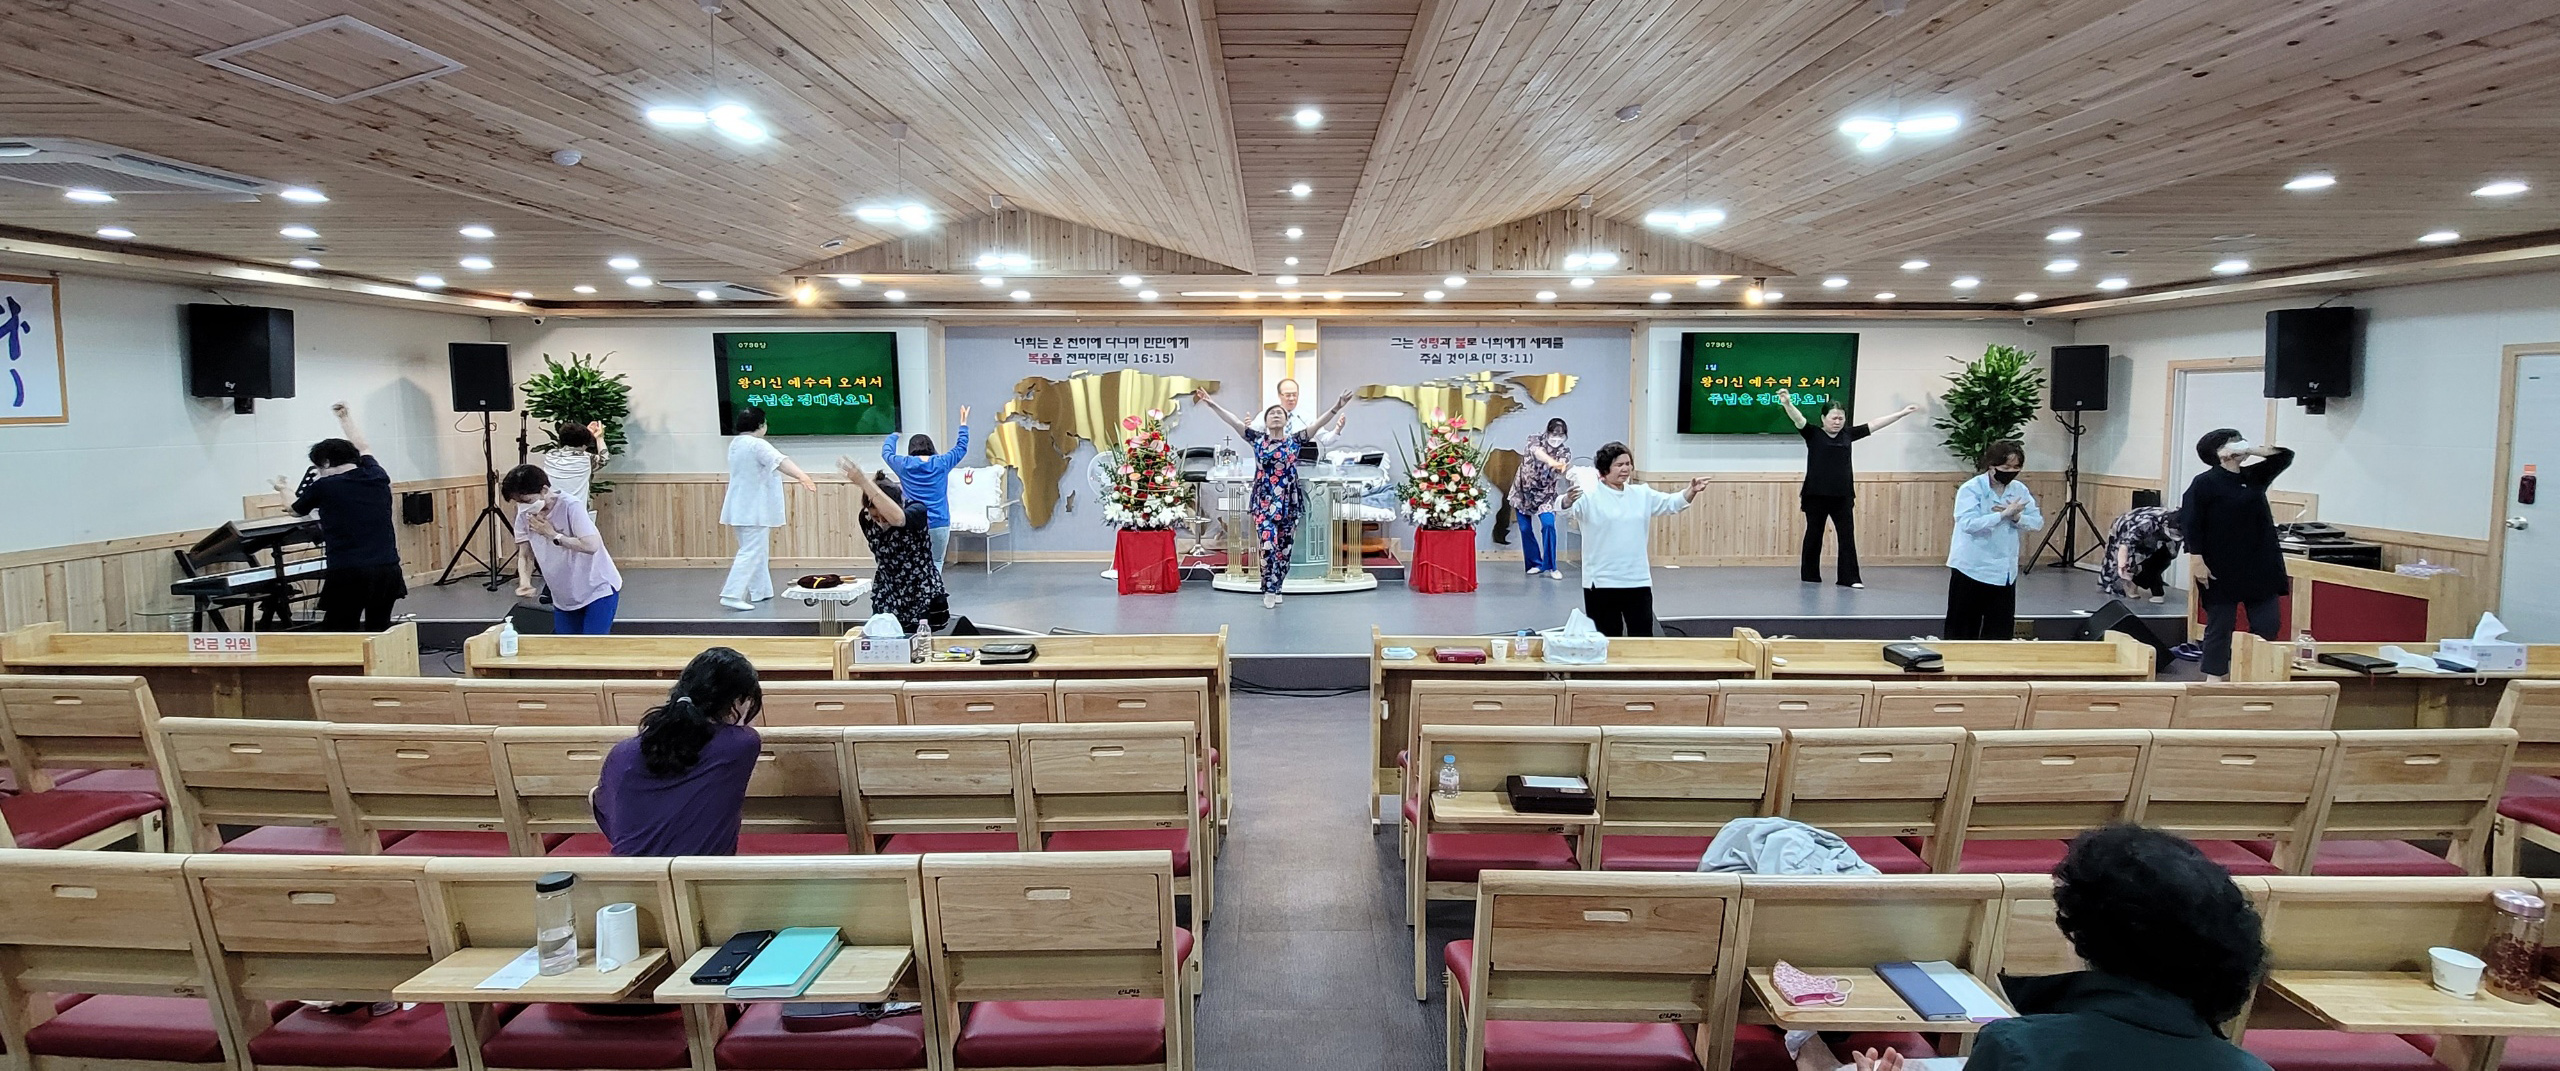 The Reverand Doctor (Pastor) Yong Doo Kim is leading church from behind the pulpit, while his wife & the women are exhaulting (glorifying & worshiping) The Lord through dancing.